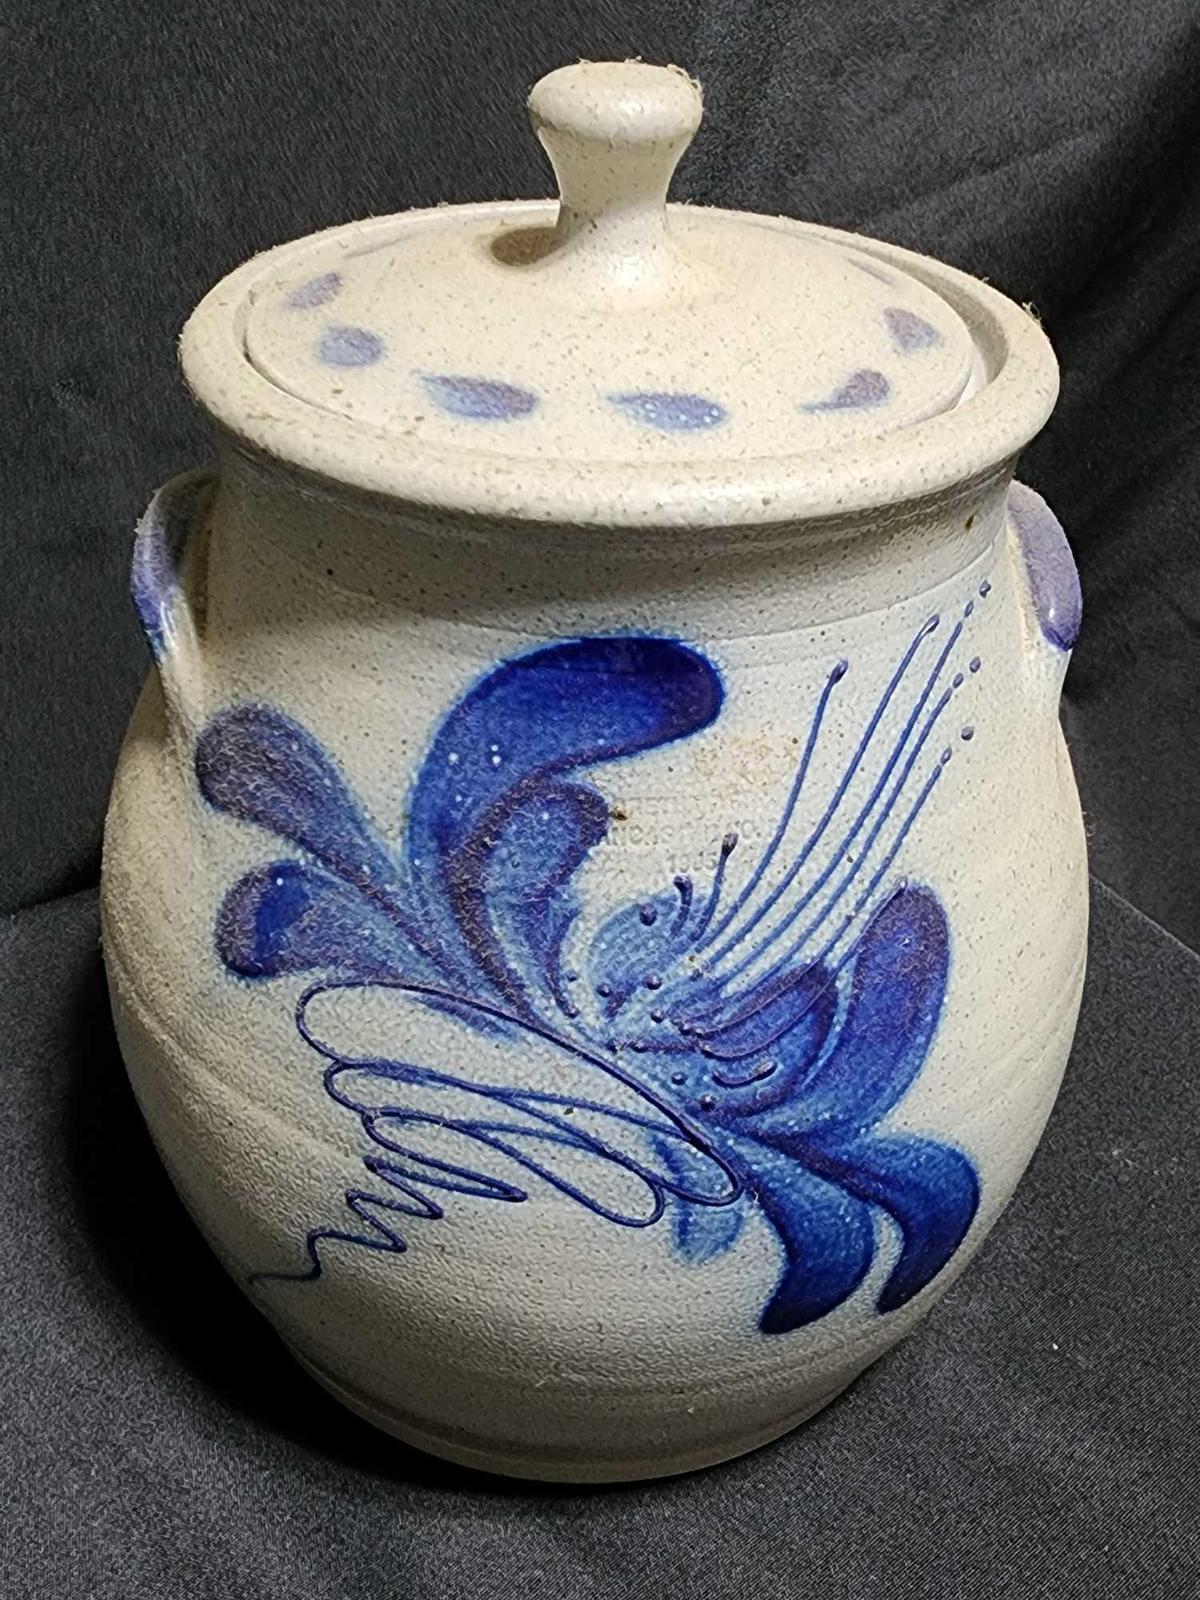 Signed and dated blue decorated covered jar